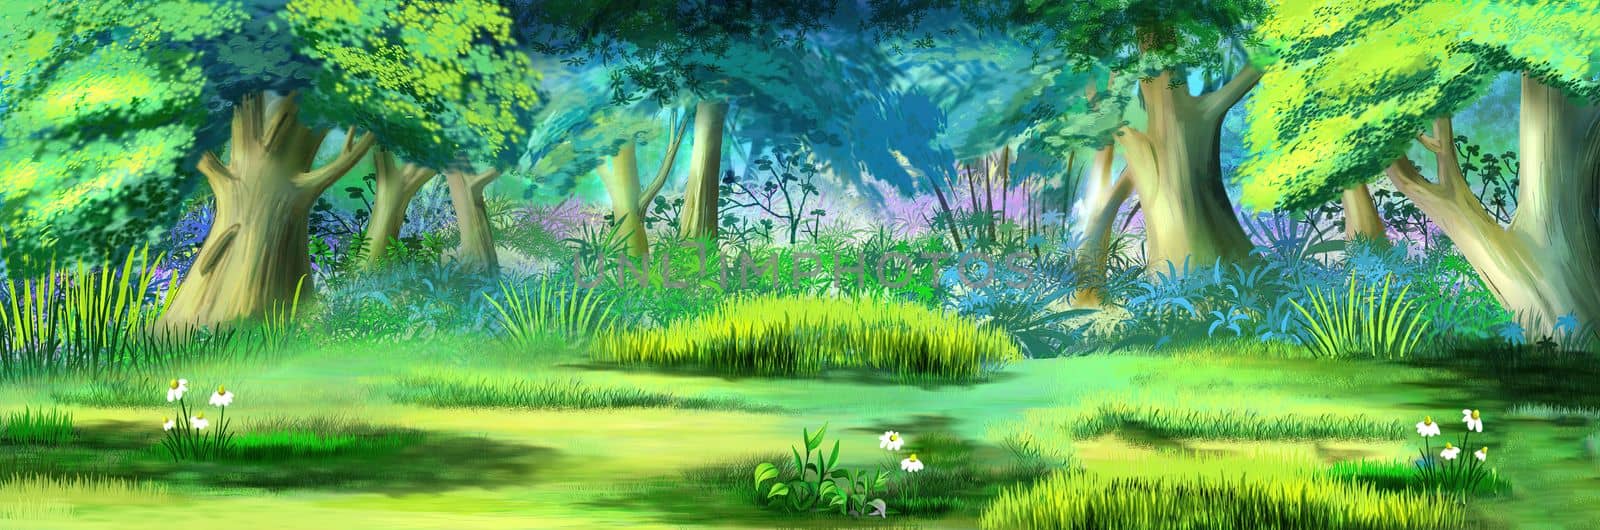 Deciduous forest on a sunny summer day. Digital Painting Background, Illustration.